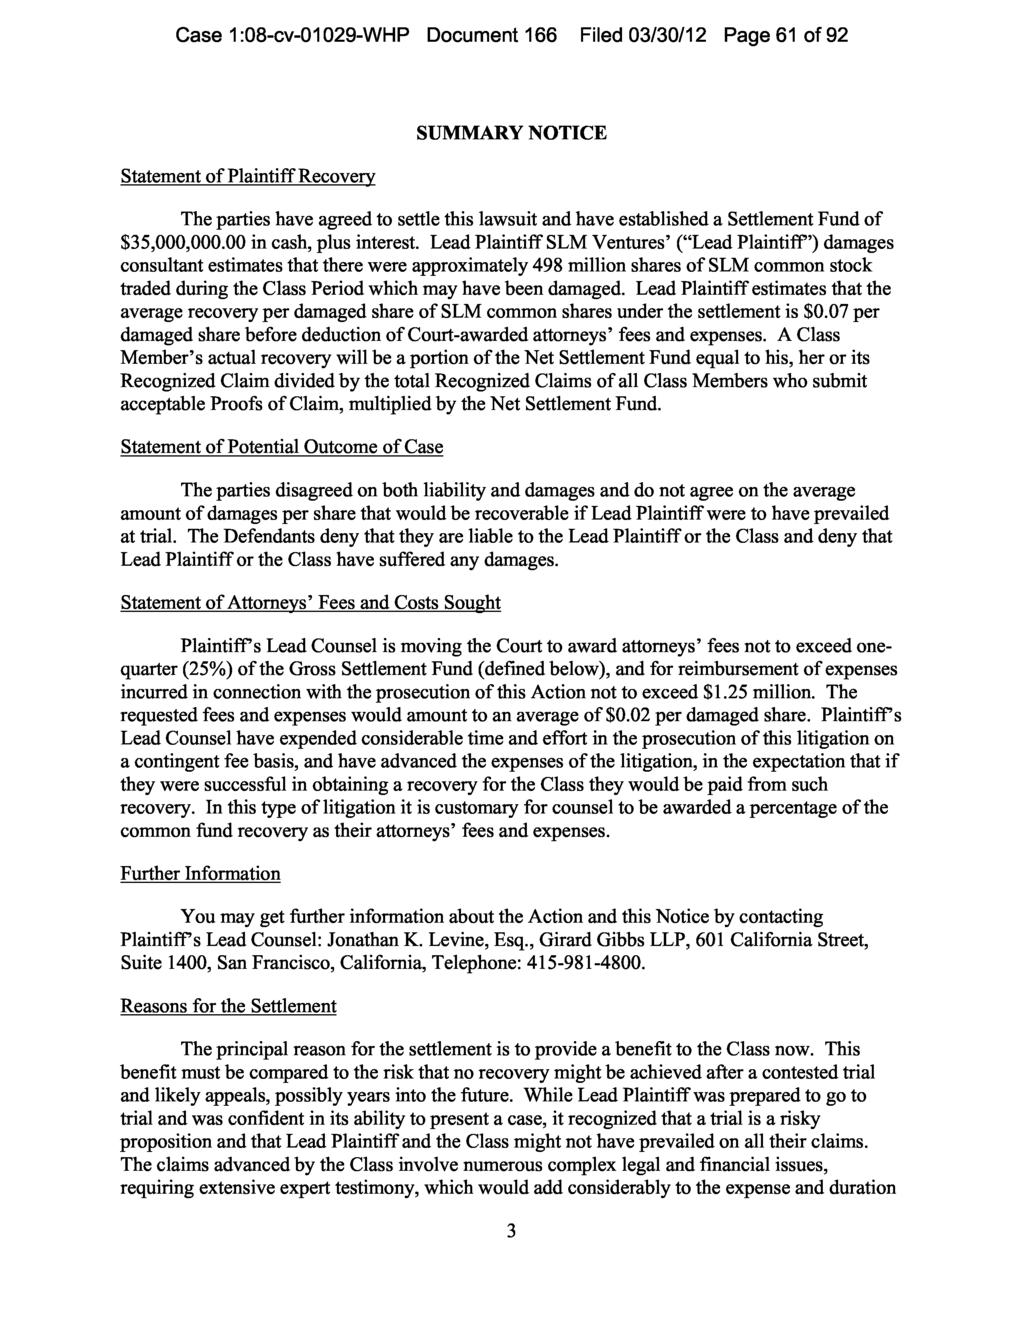 Case 1:08-cv-01029-WHP Document 166 Filed 03/30/12 Page 61 of 92 Statement of Plaintiff Recovery SUMMARY NOTICE The parties have agreed to settle this lawsuit and have established a Settlement Fund